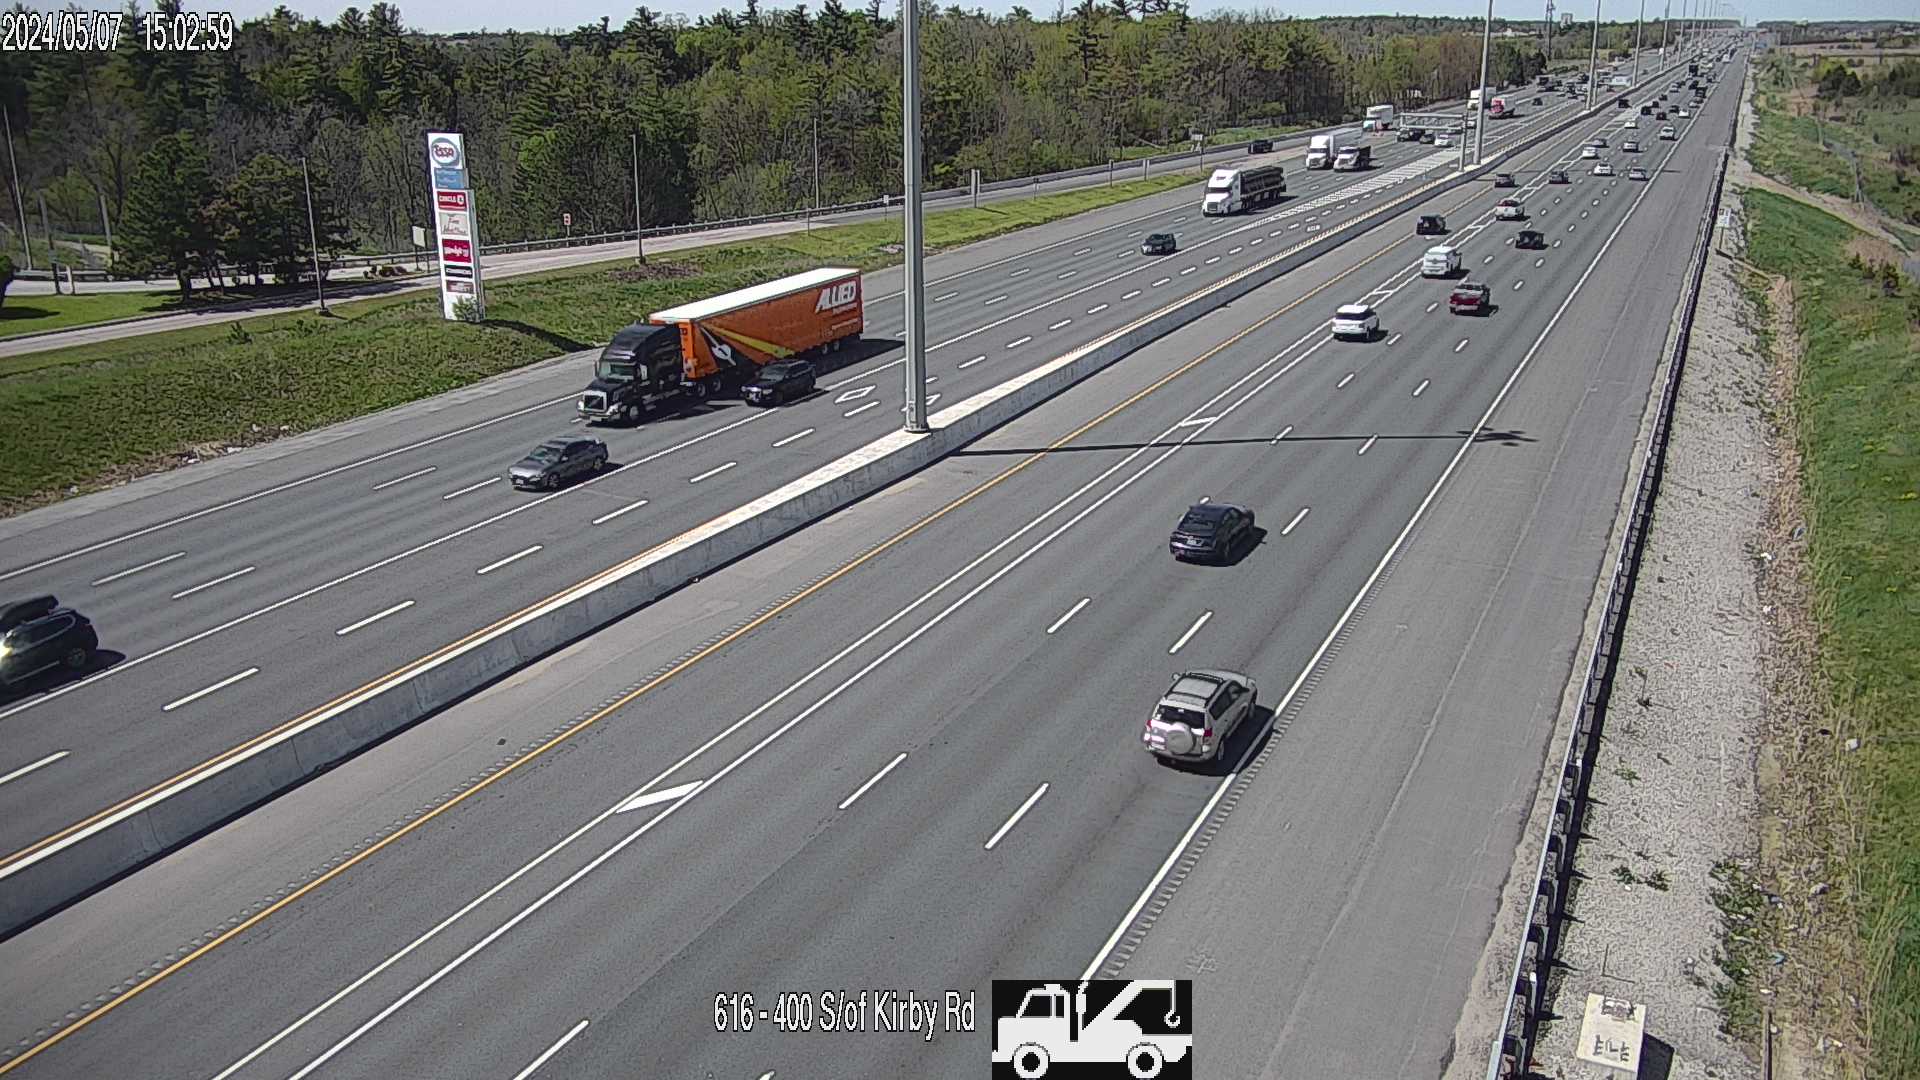 Live Highway 400 South from Barrie to Highway 401 for MORE CAMERAS - CLICK HERE!